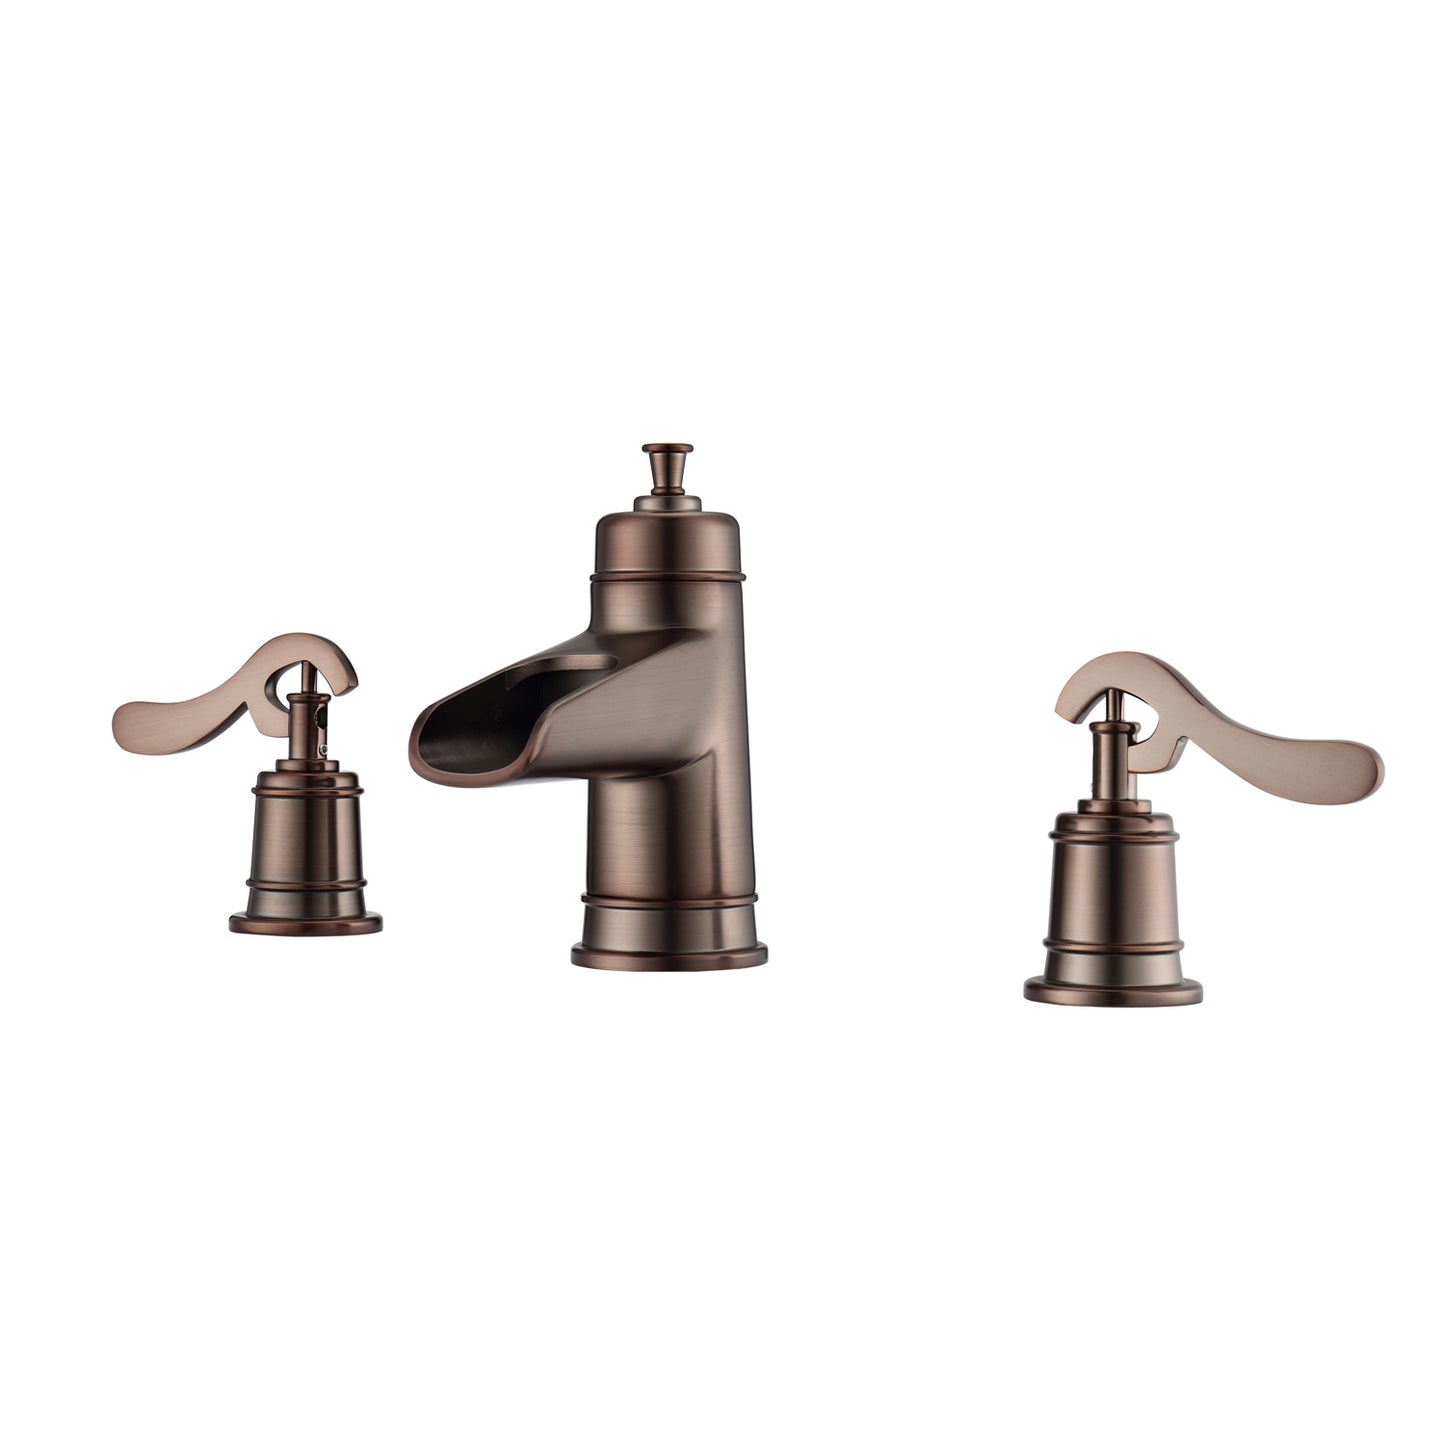 Batson 8" Widespread Oil Rubbed Bronze Bathroom Faucet with Lever Handles